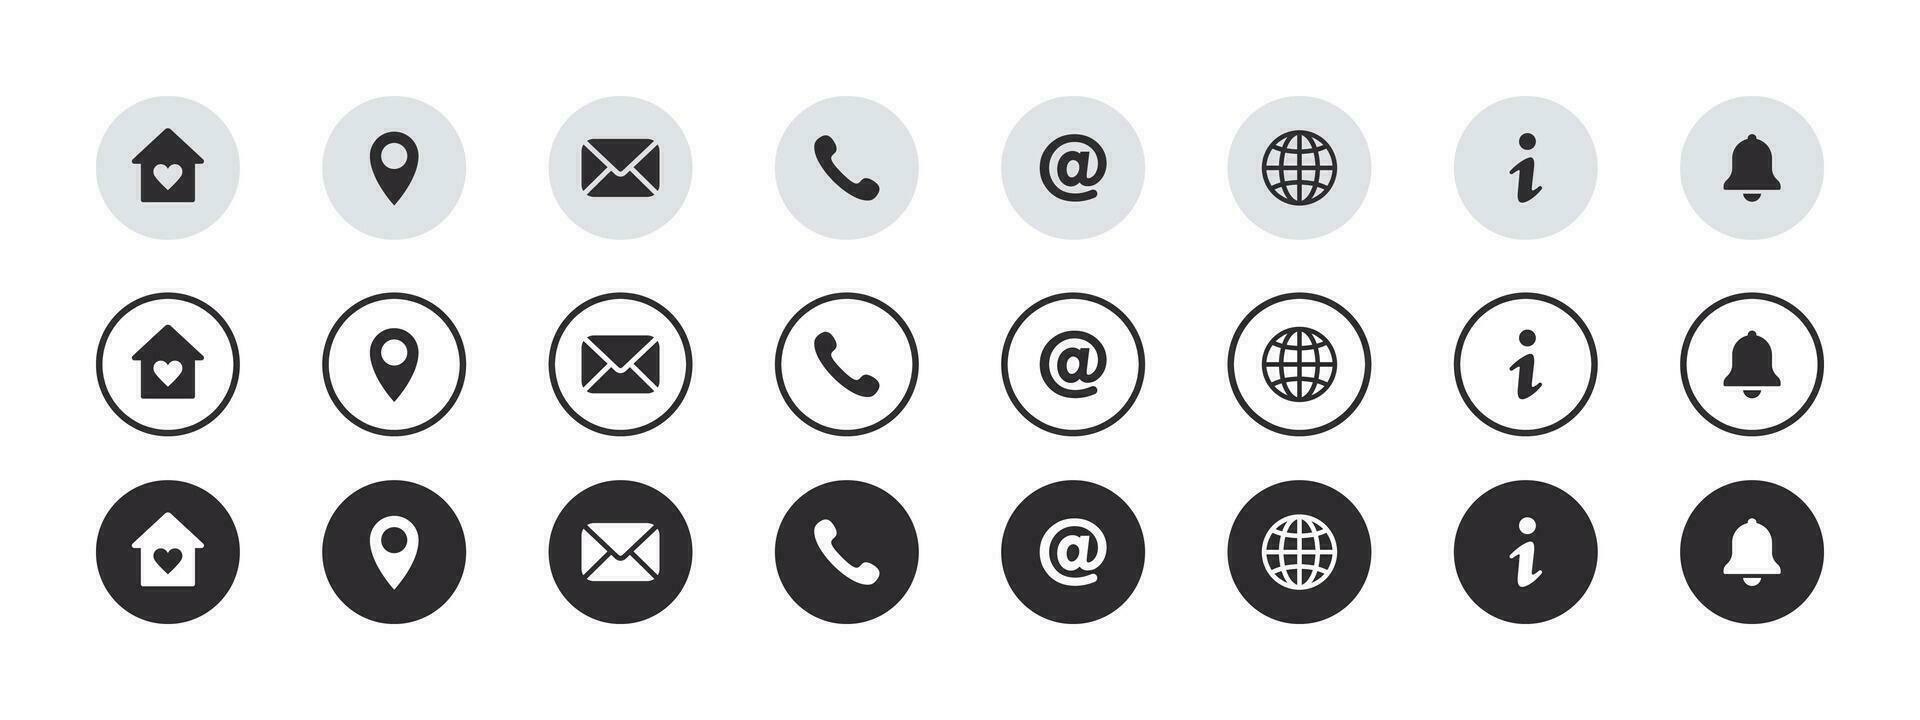 Contact information icons. Contact us icons set in different types. Vector scalable graphics